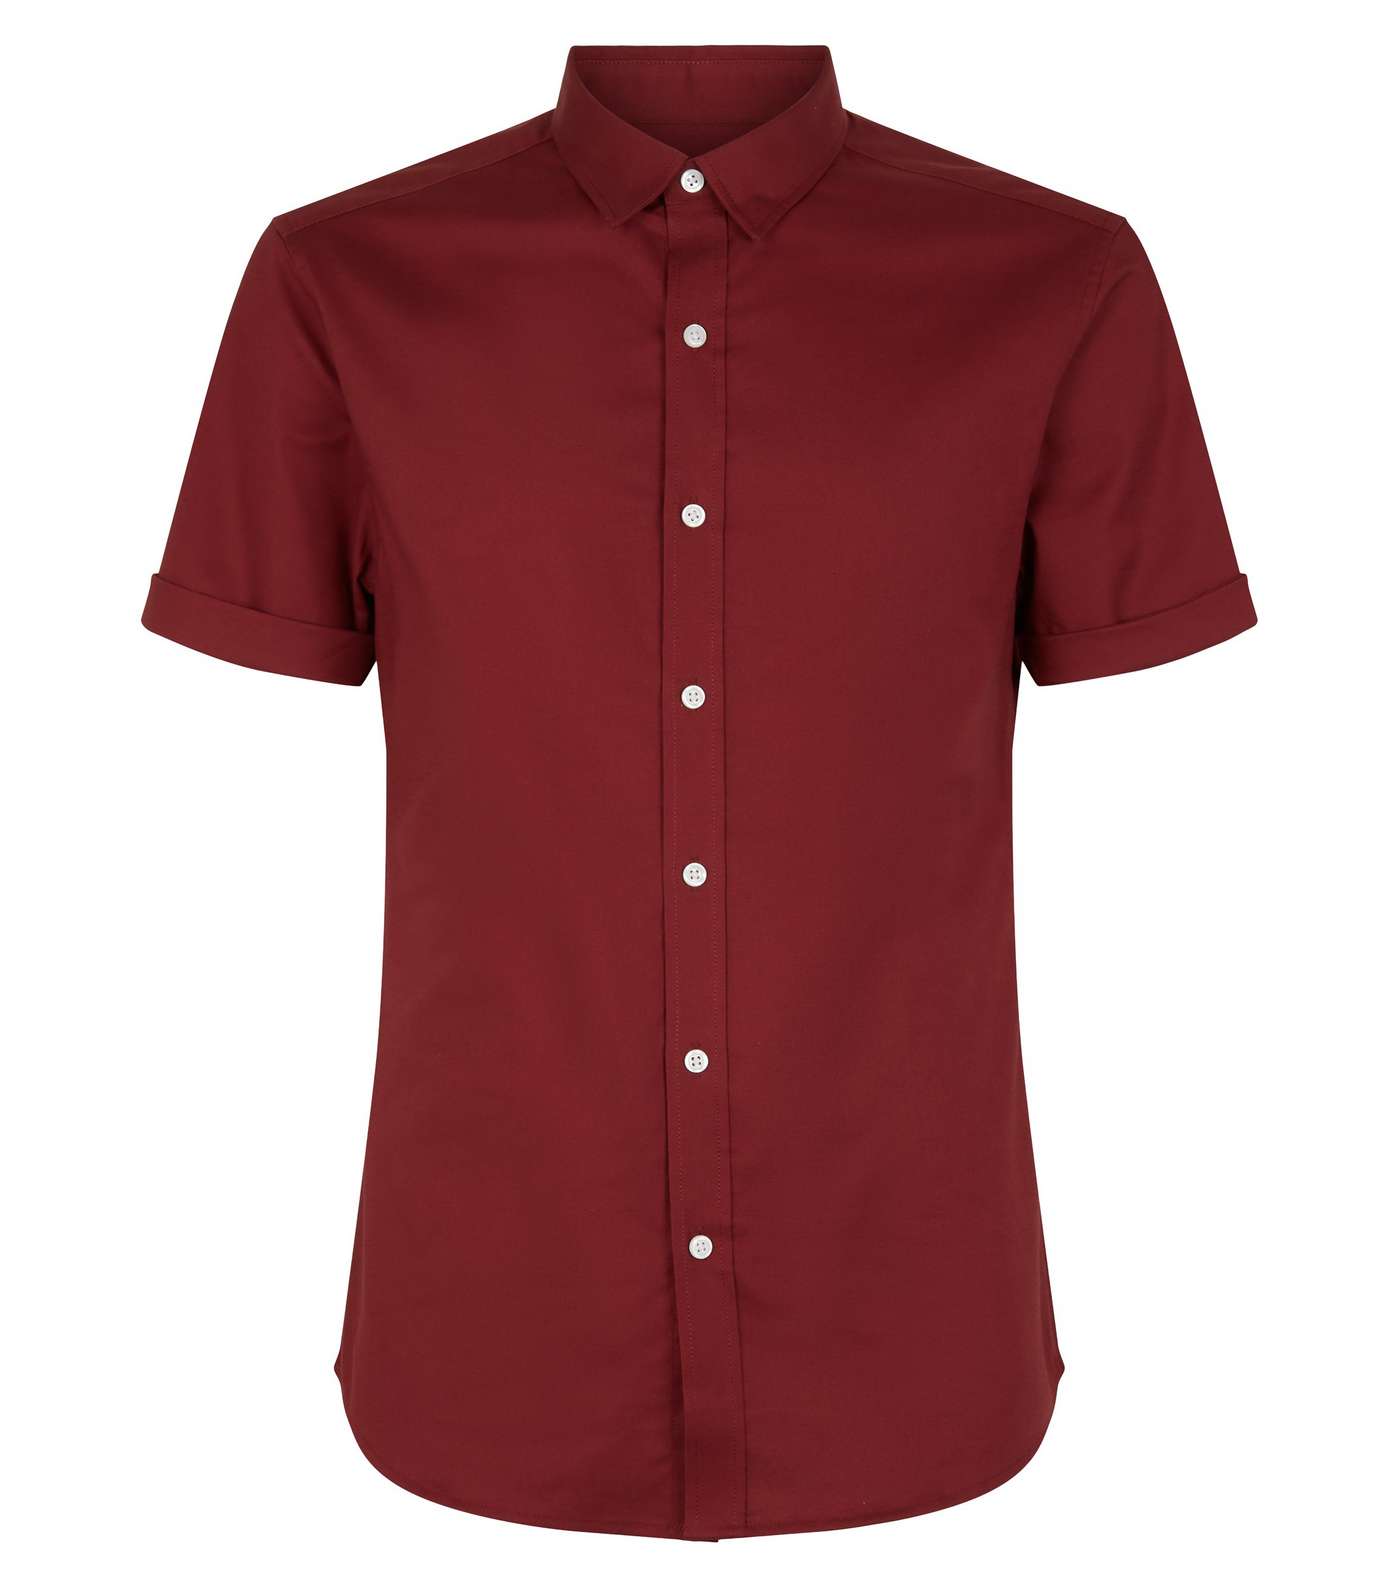 Burgundy Short Sleeve Muscle Fit Oxford Shirt Image 4